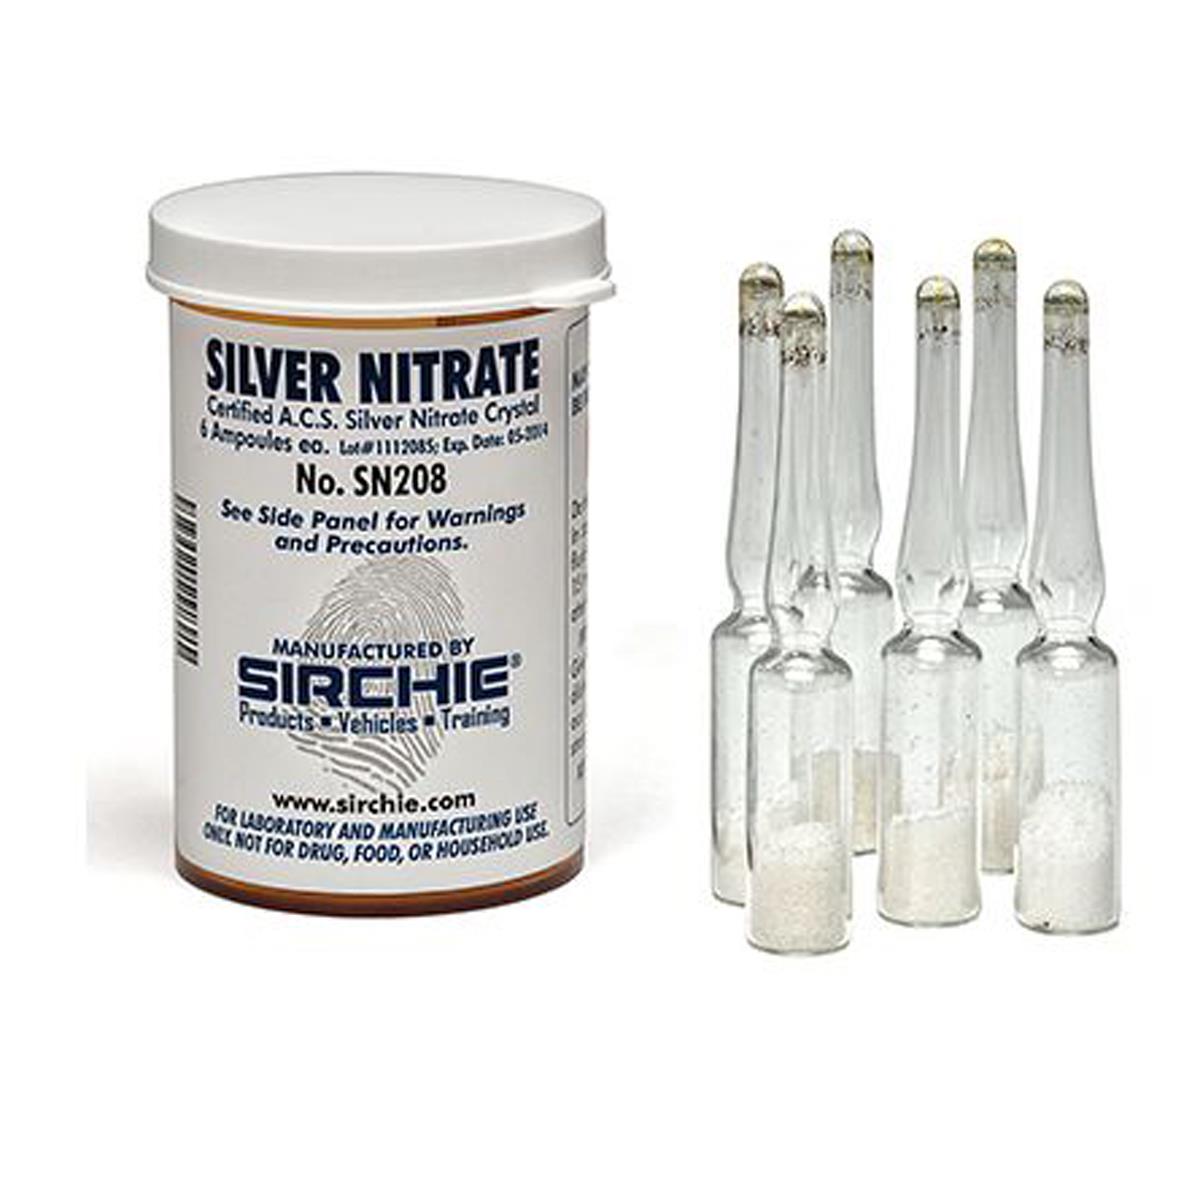 Image of Sirchie Silver Nitrate Crystal Ampoules